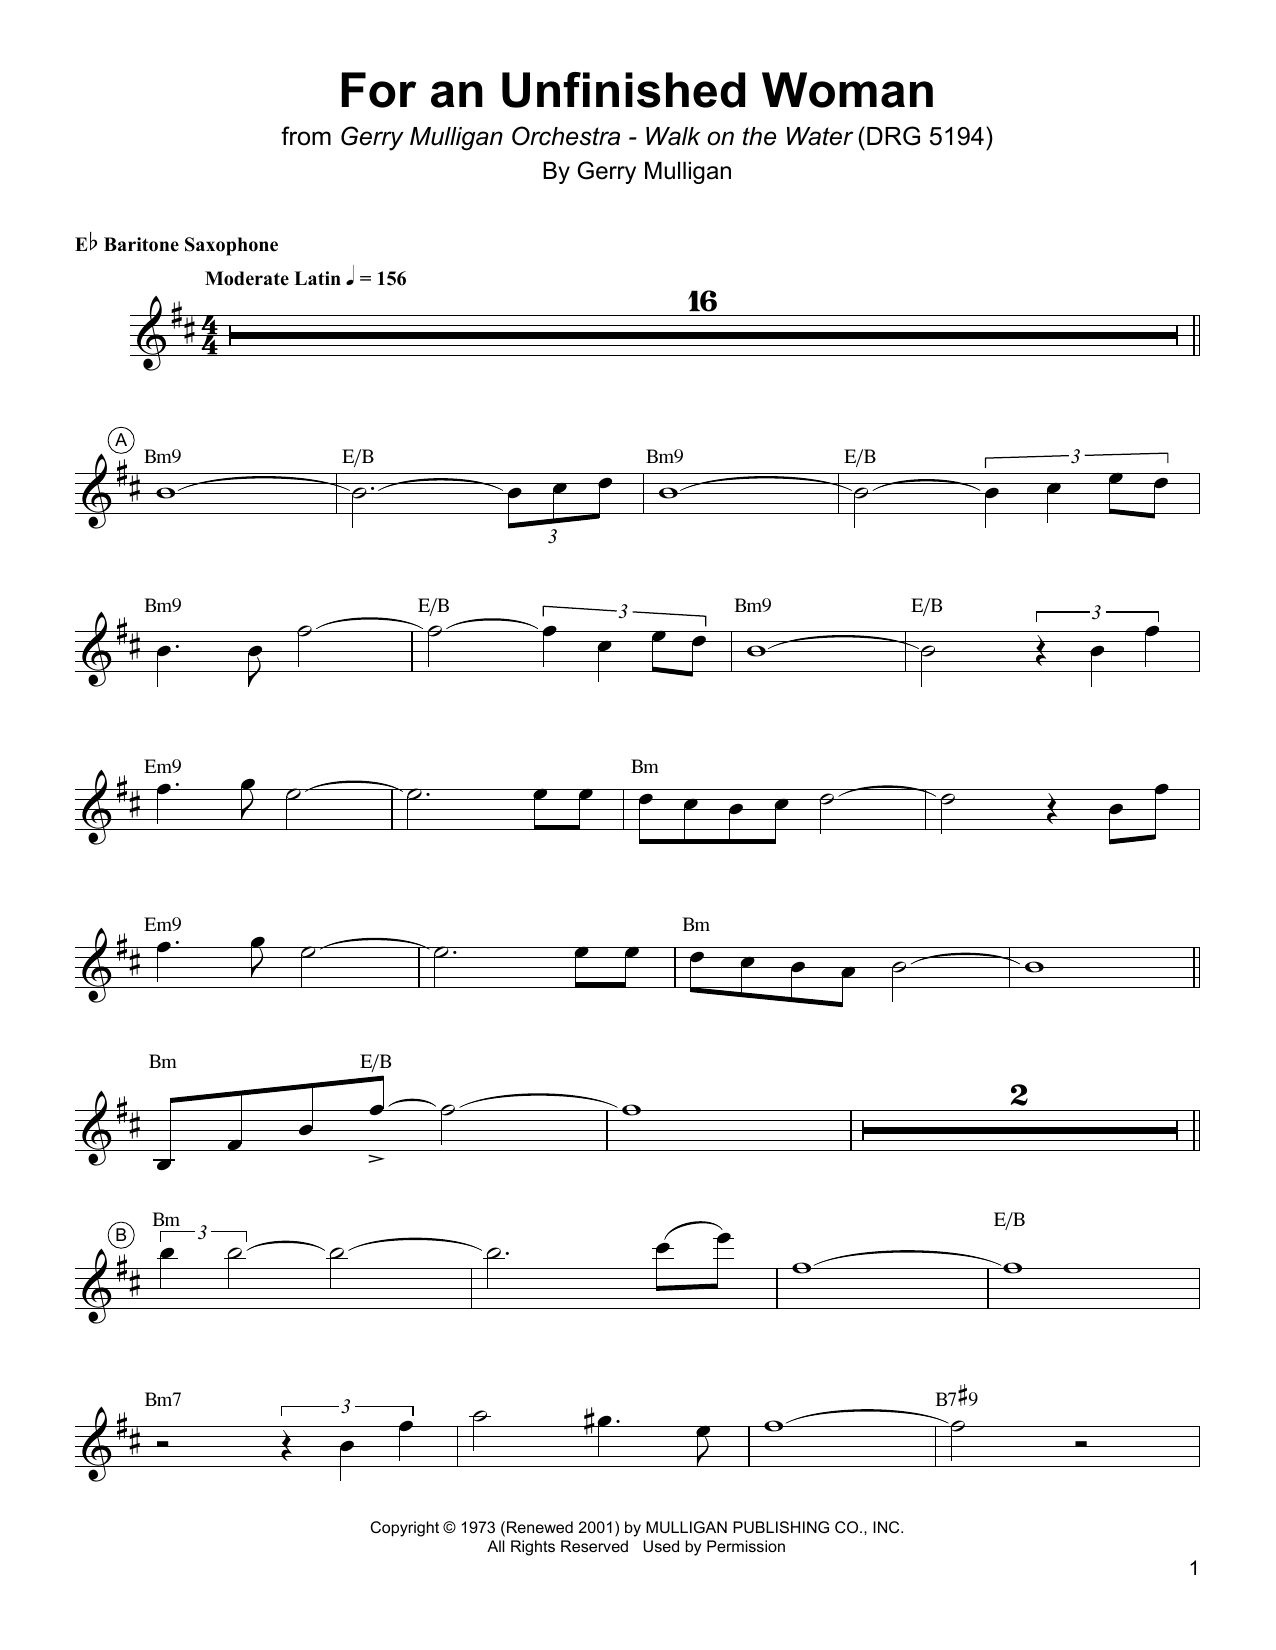 Gerry Mulligan For An Unfinished Woman sheet music notes printable PDF score